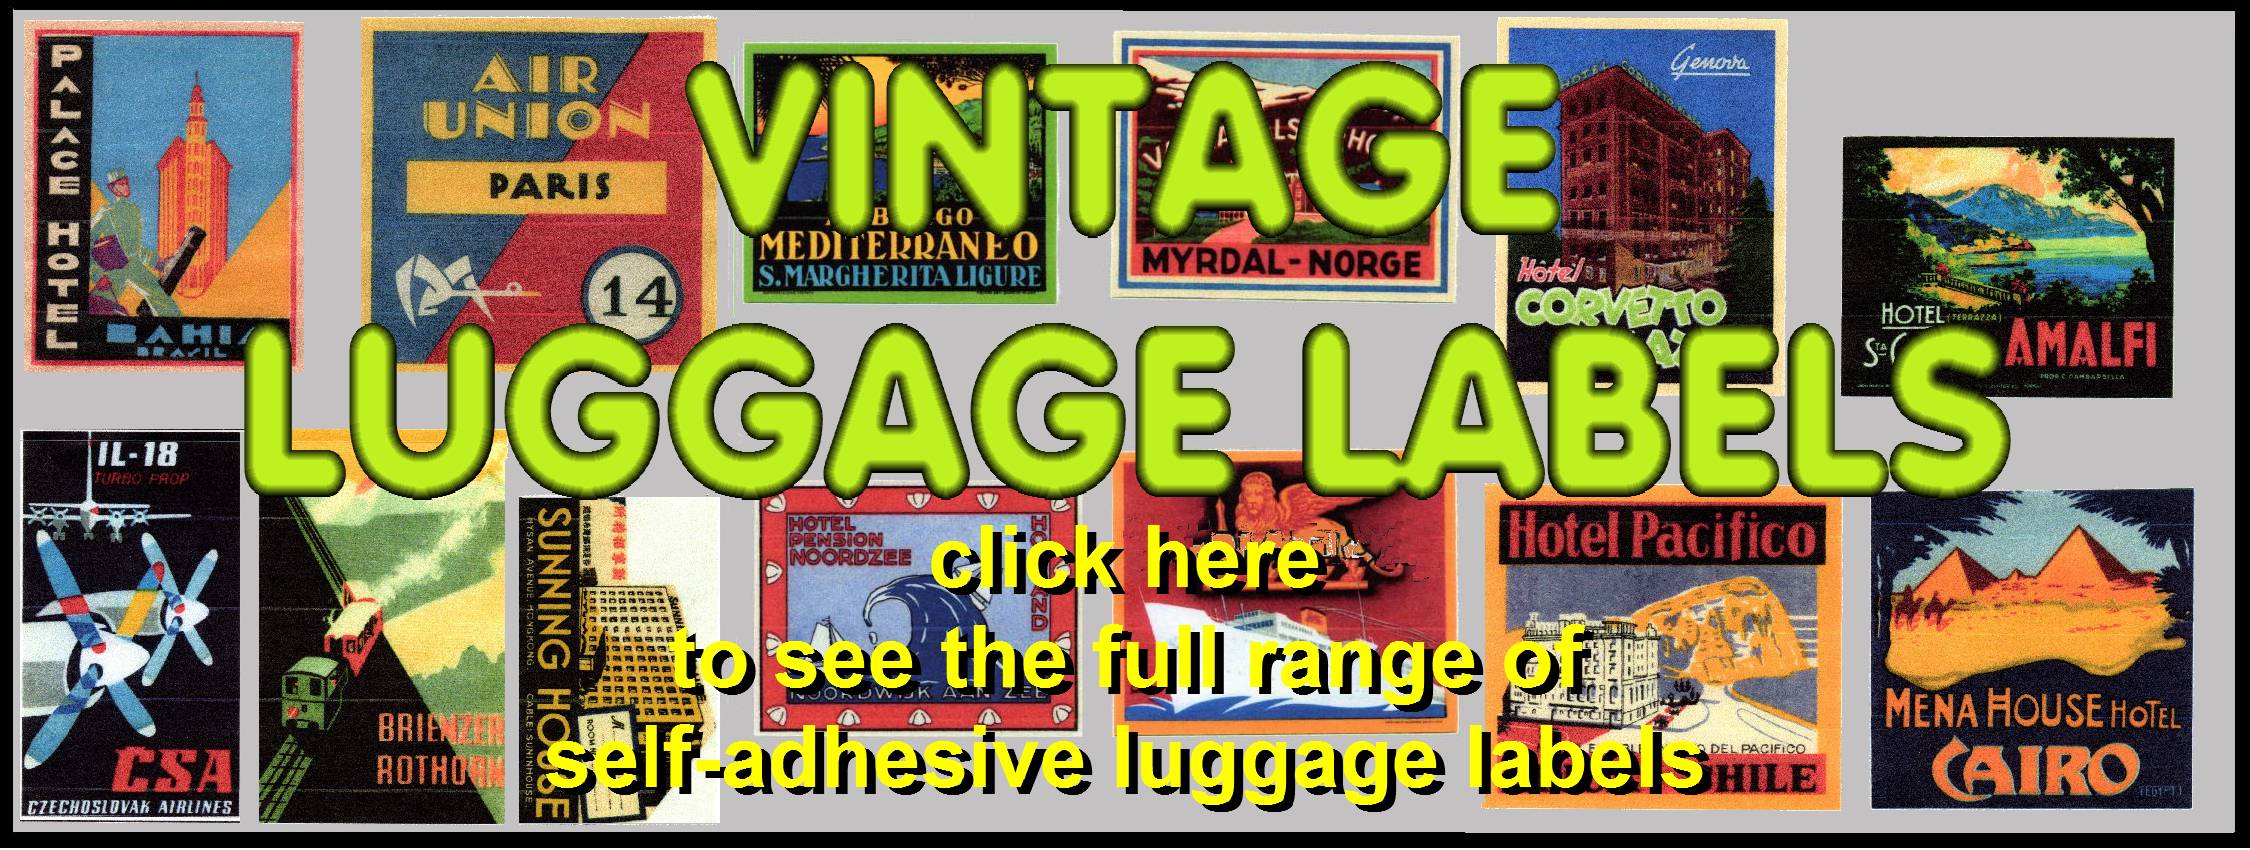 Vintage luggage lables